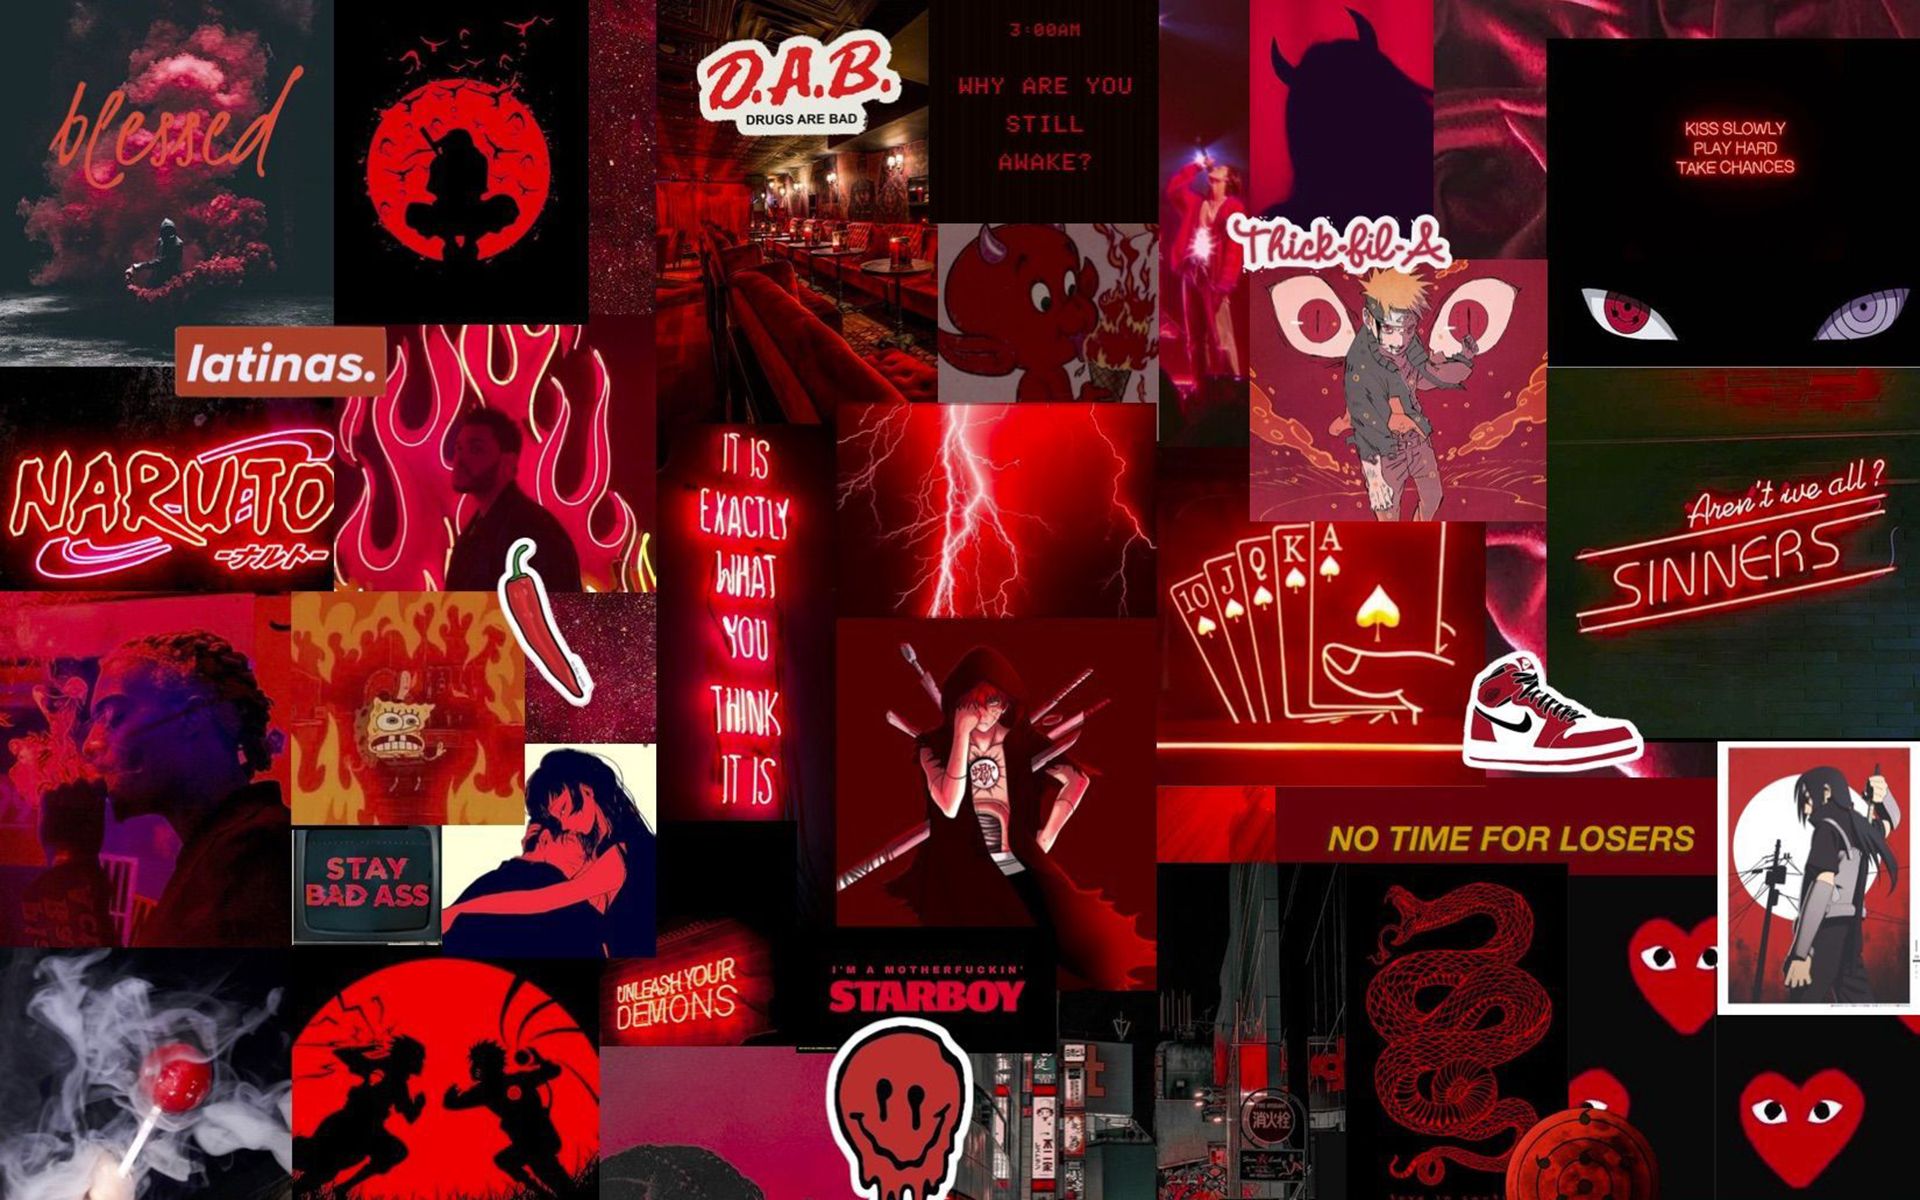 A collage of various red and black images - Cool